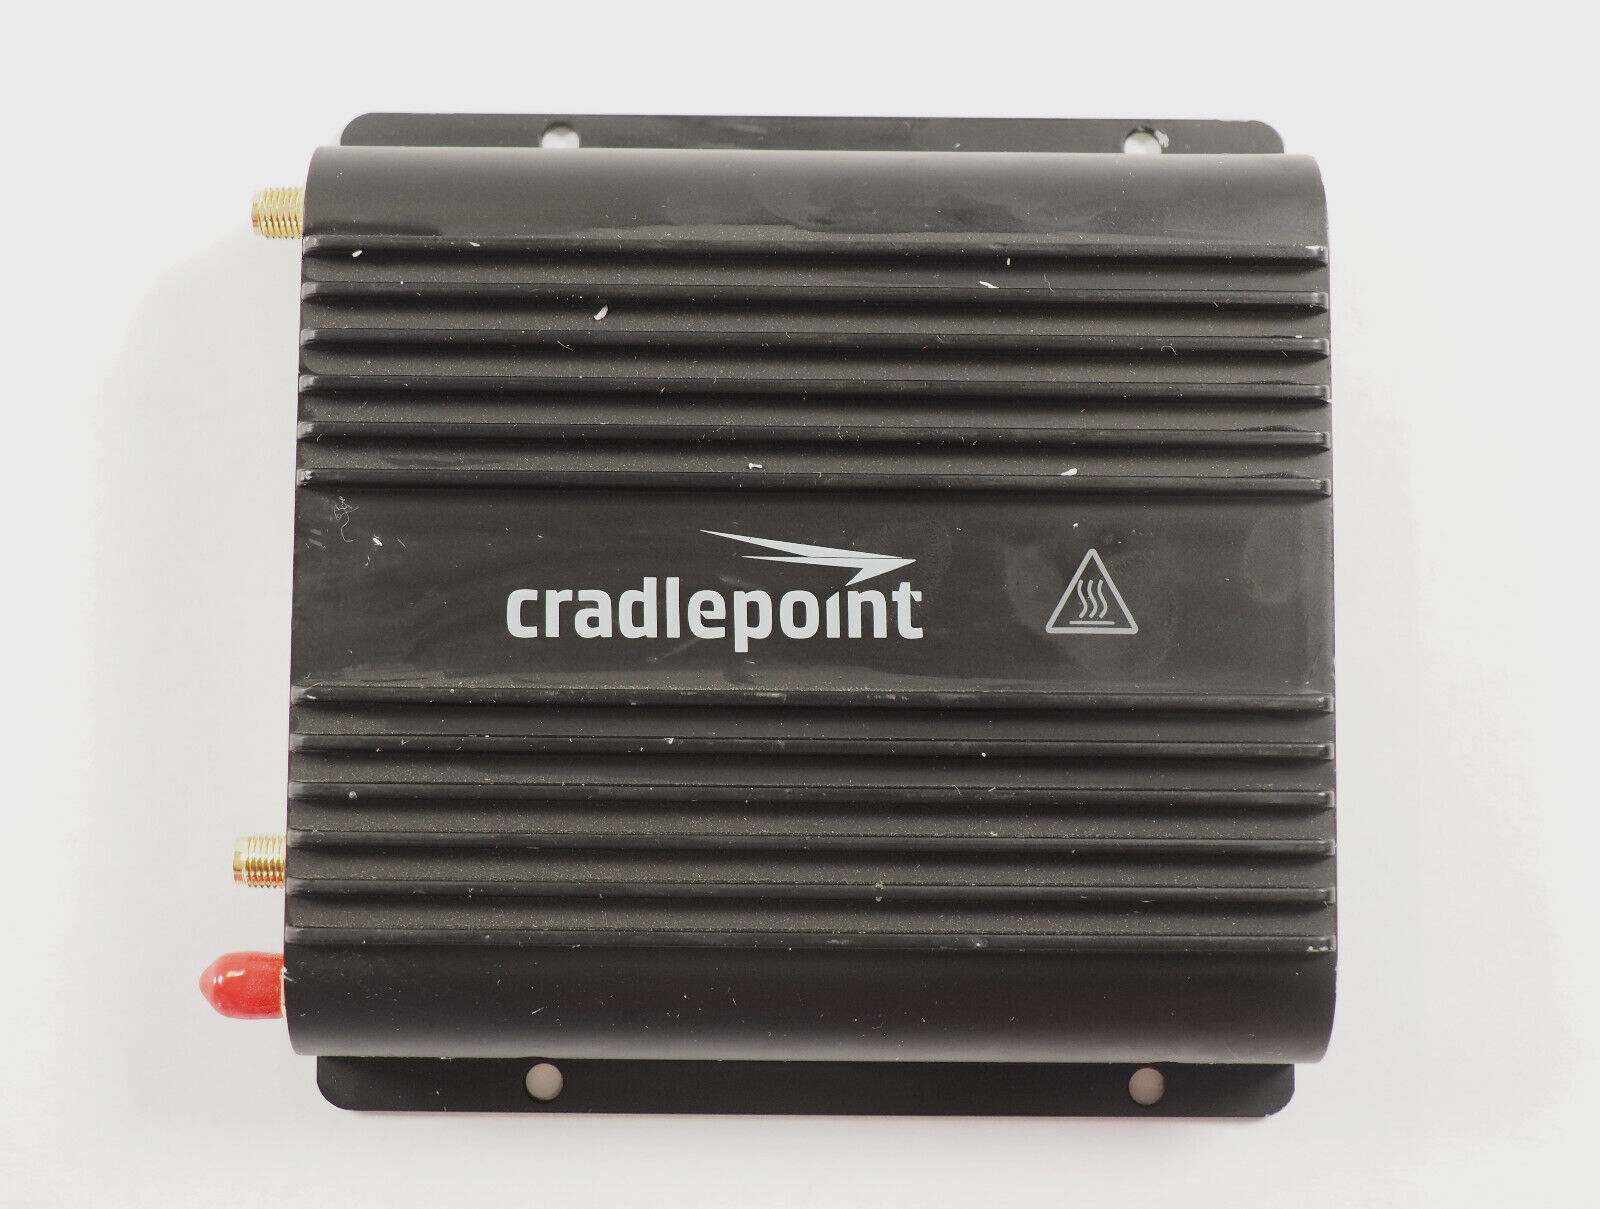 Cradlepoint IBR650C-150M-D S5A907A MultiCarrier Rugged LTE Router No Antennas